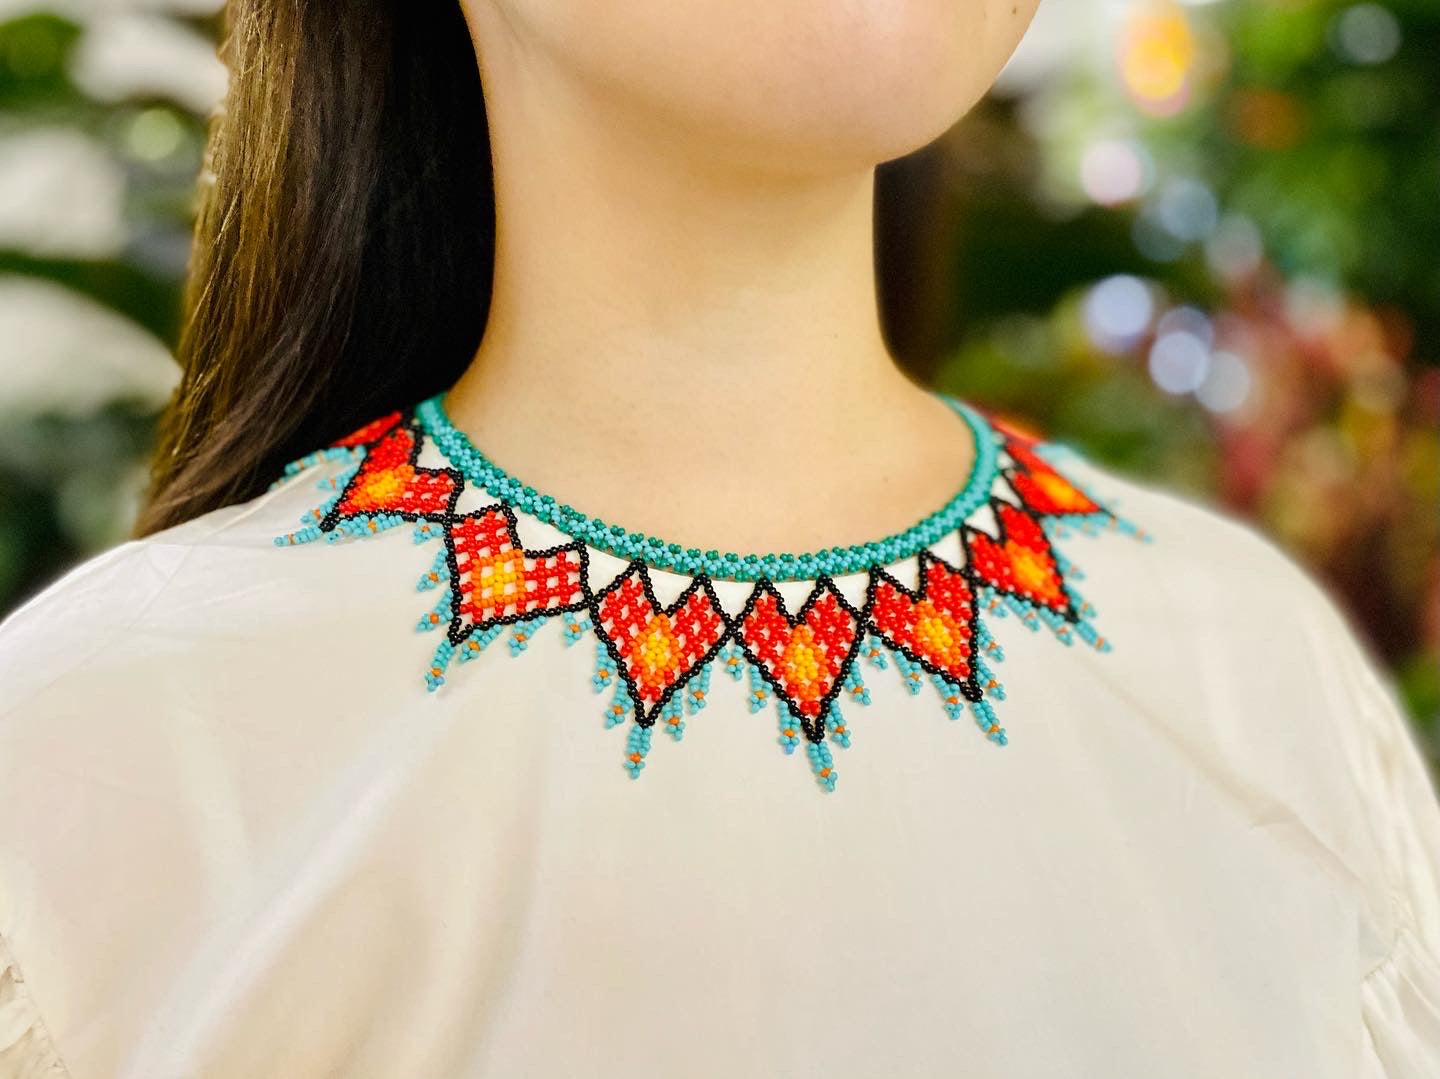 Enlace Beads Collar Necklace / Corazon